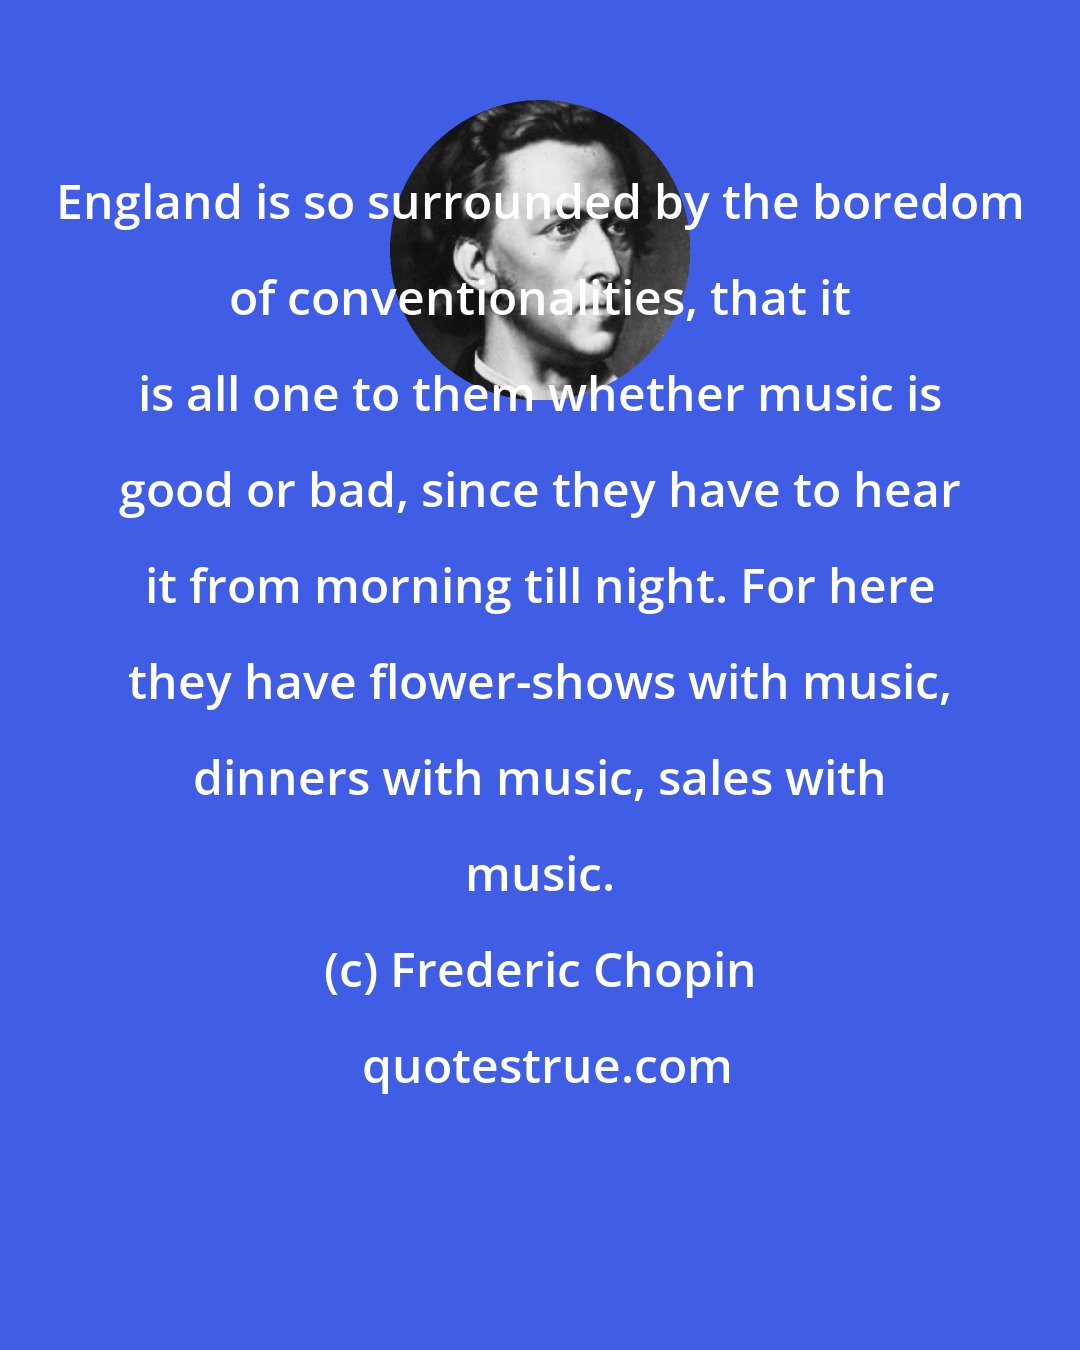 Frederic Chopin: England is so surrounded by the boredom of conventionalities, that it is all one to them whether music is good or bad, since they have to hear it from morning till night. For here they have flower-shows with music, dinners with music, sales with music.